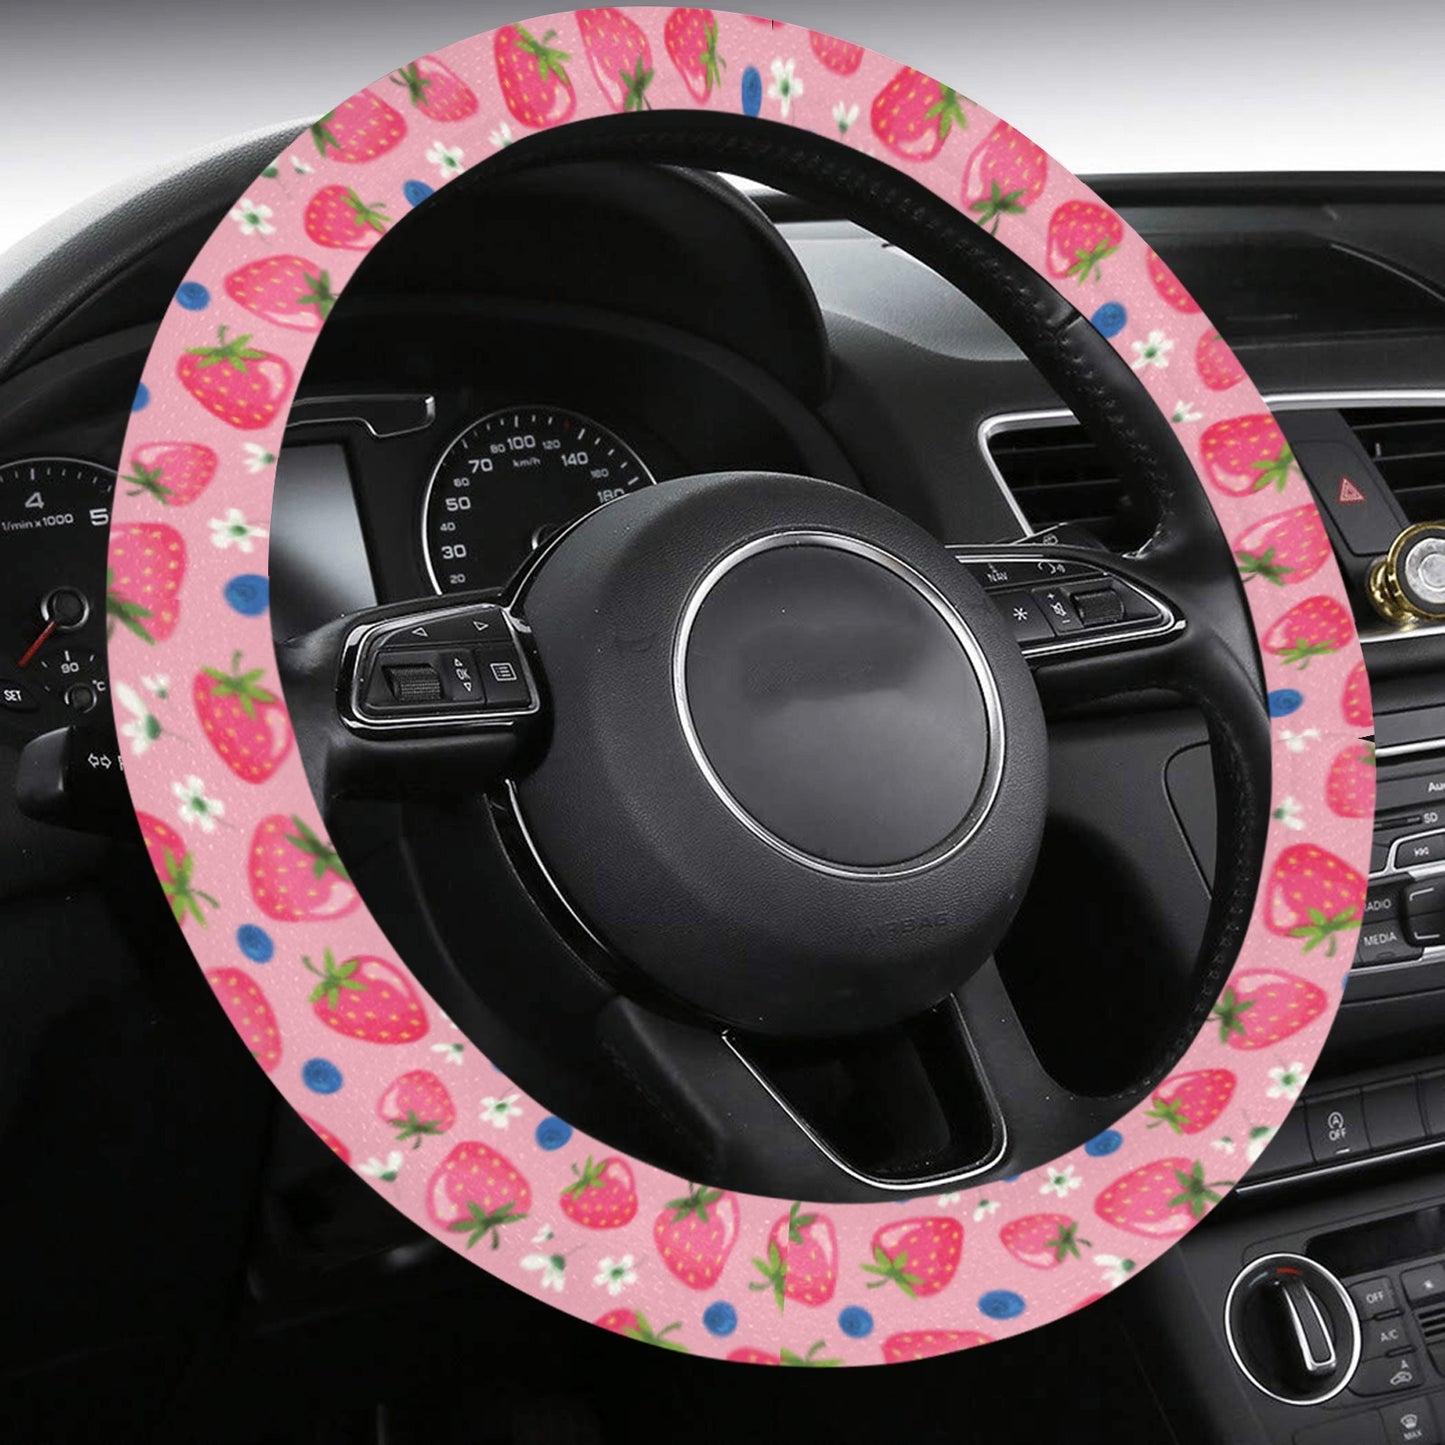 Strawberry Steering Wheel Cover with Anti-Slip Insert, Pink Red Fruit Floral Flowers Kawaii Women Print Car Auto Wrap Protector Accessories Starcove Fashion